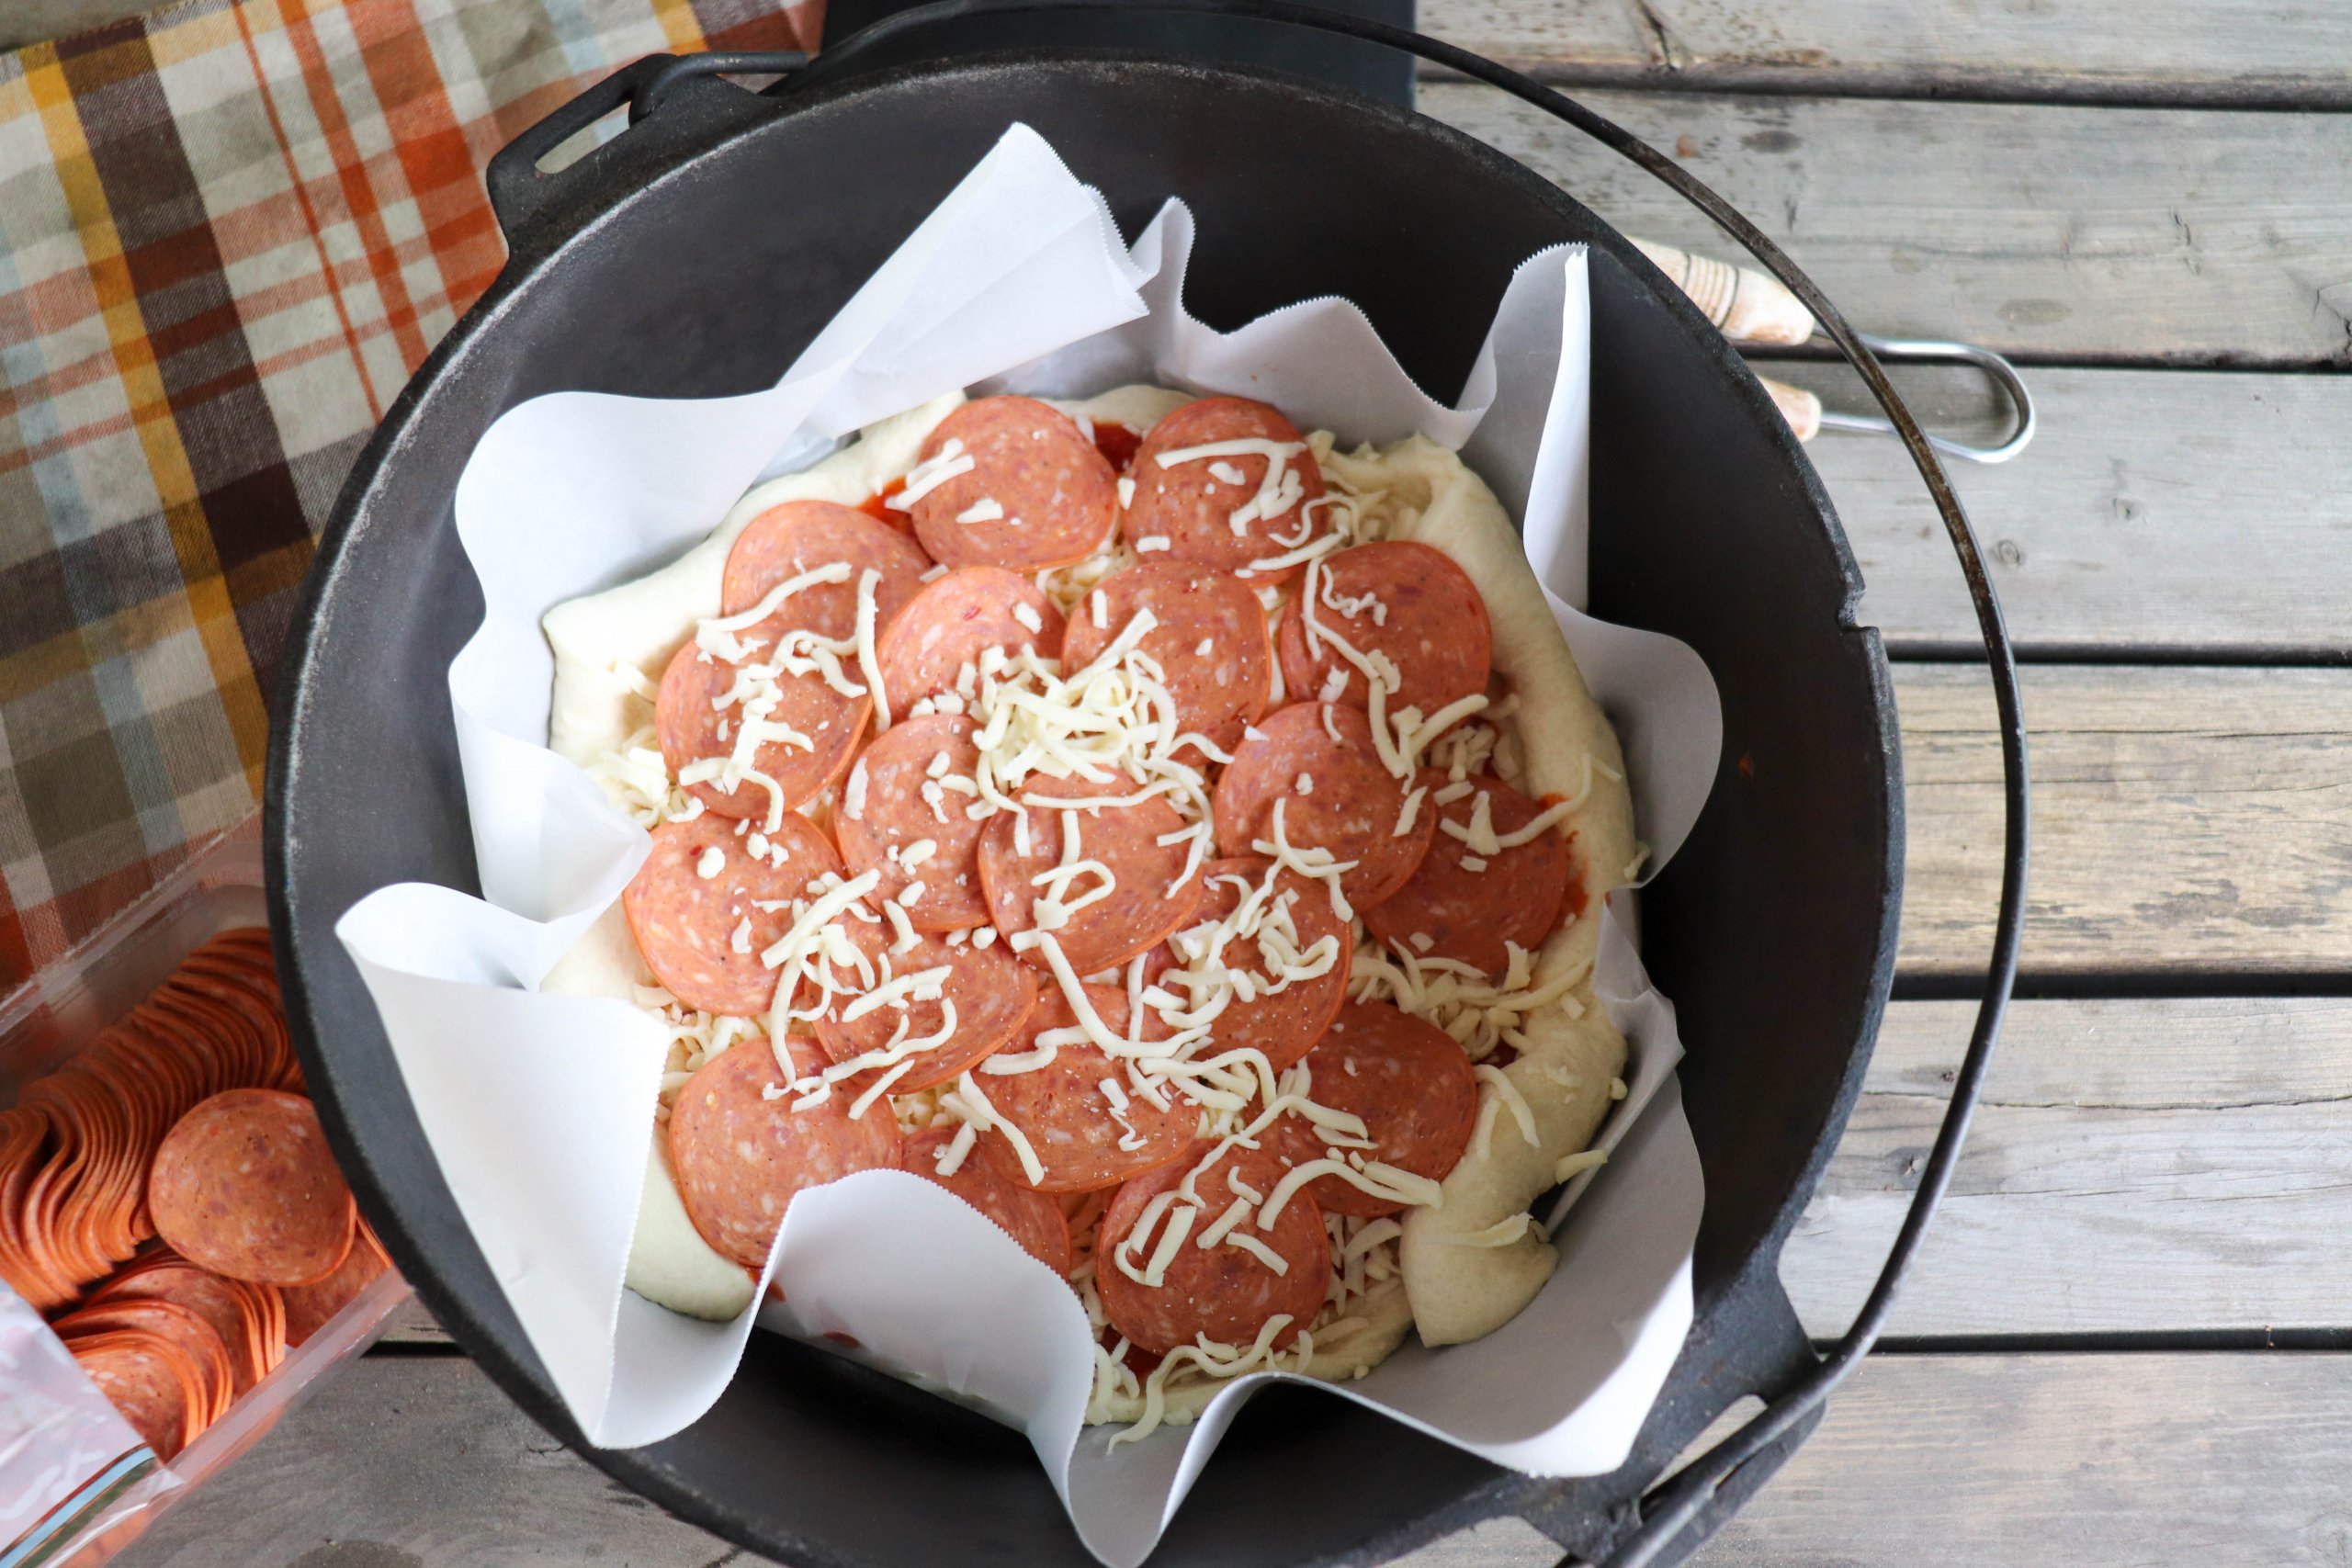 Pizza dough with pepperoni slices and shredded mozzarella cheese on top in a cast iron dutch oven with parchment paper liner on a picnic table.